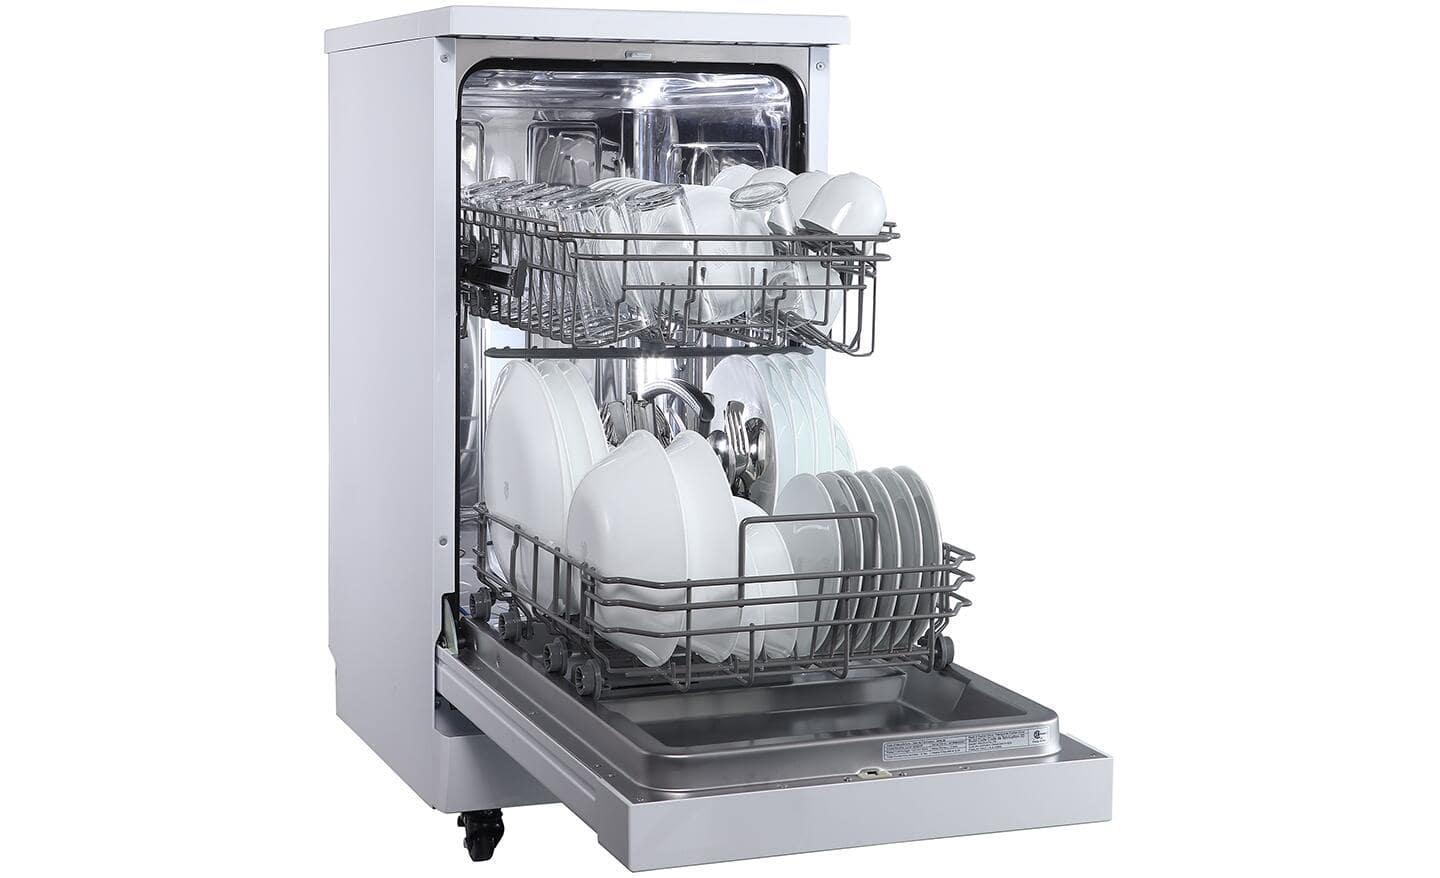 Portable dishwasher filled with clean dishes